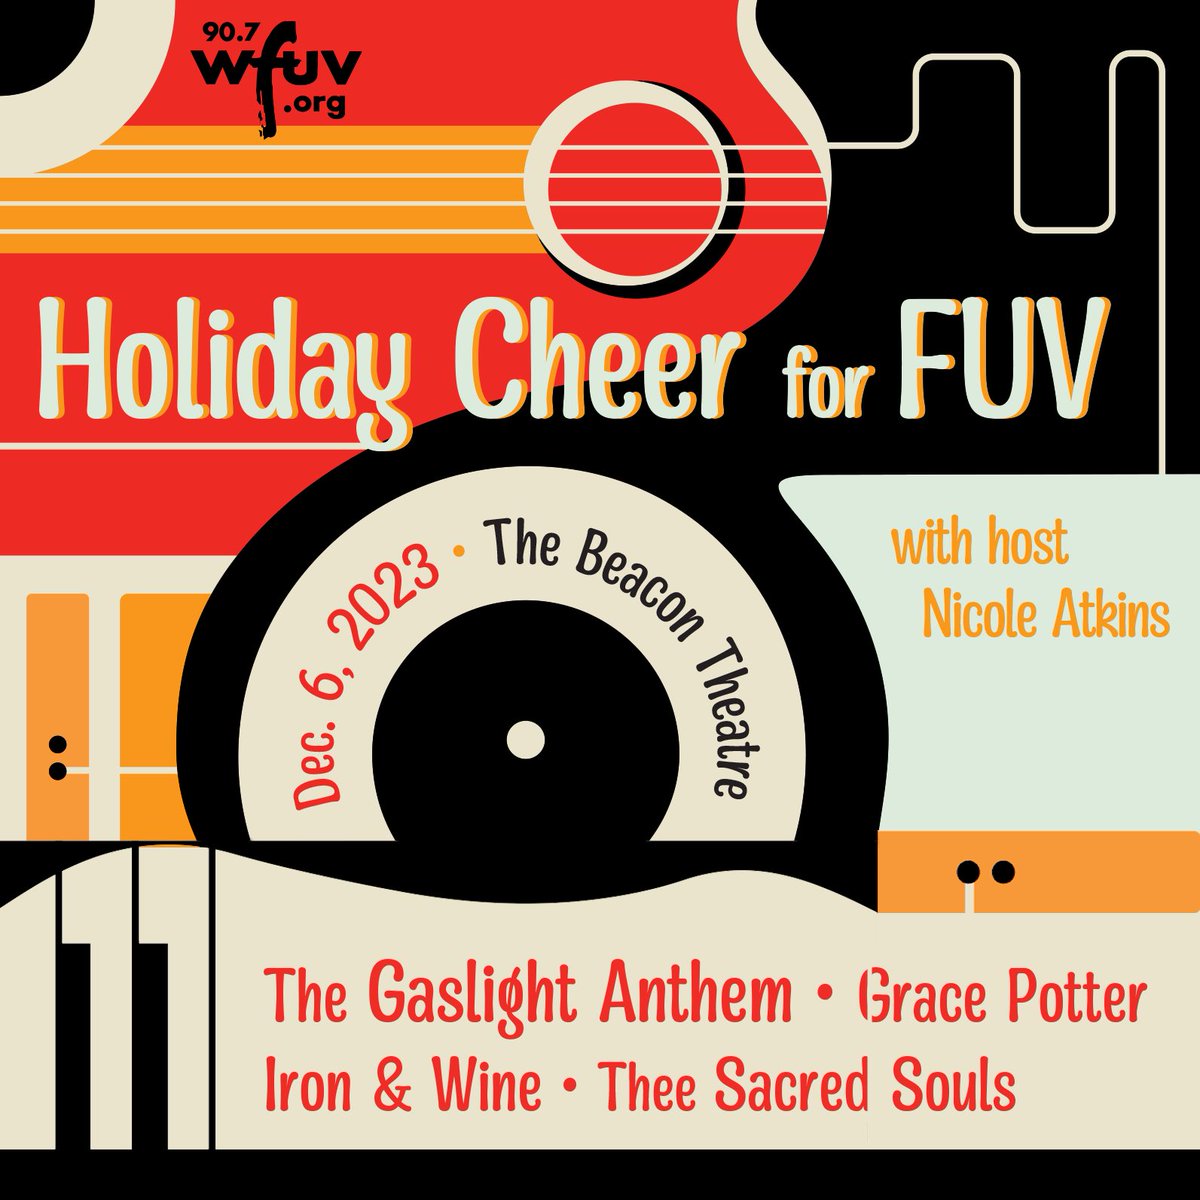 Happy to announce we’re playing Holiday Cheer for @wfuv on Dec 6 at @BeaconTheatre in NYC! Tickets are on sale this Friday at 11am ET: 10atoms.com/GP-Tour #fuvcheer